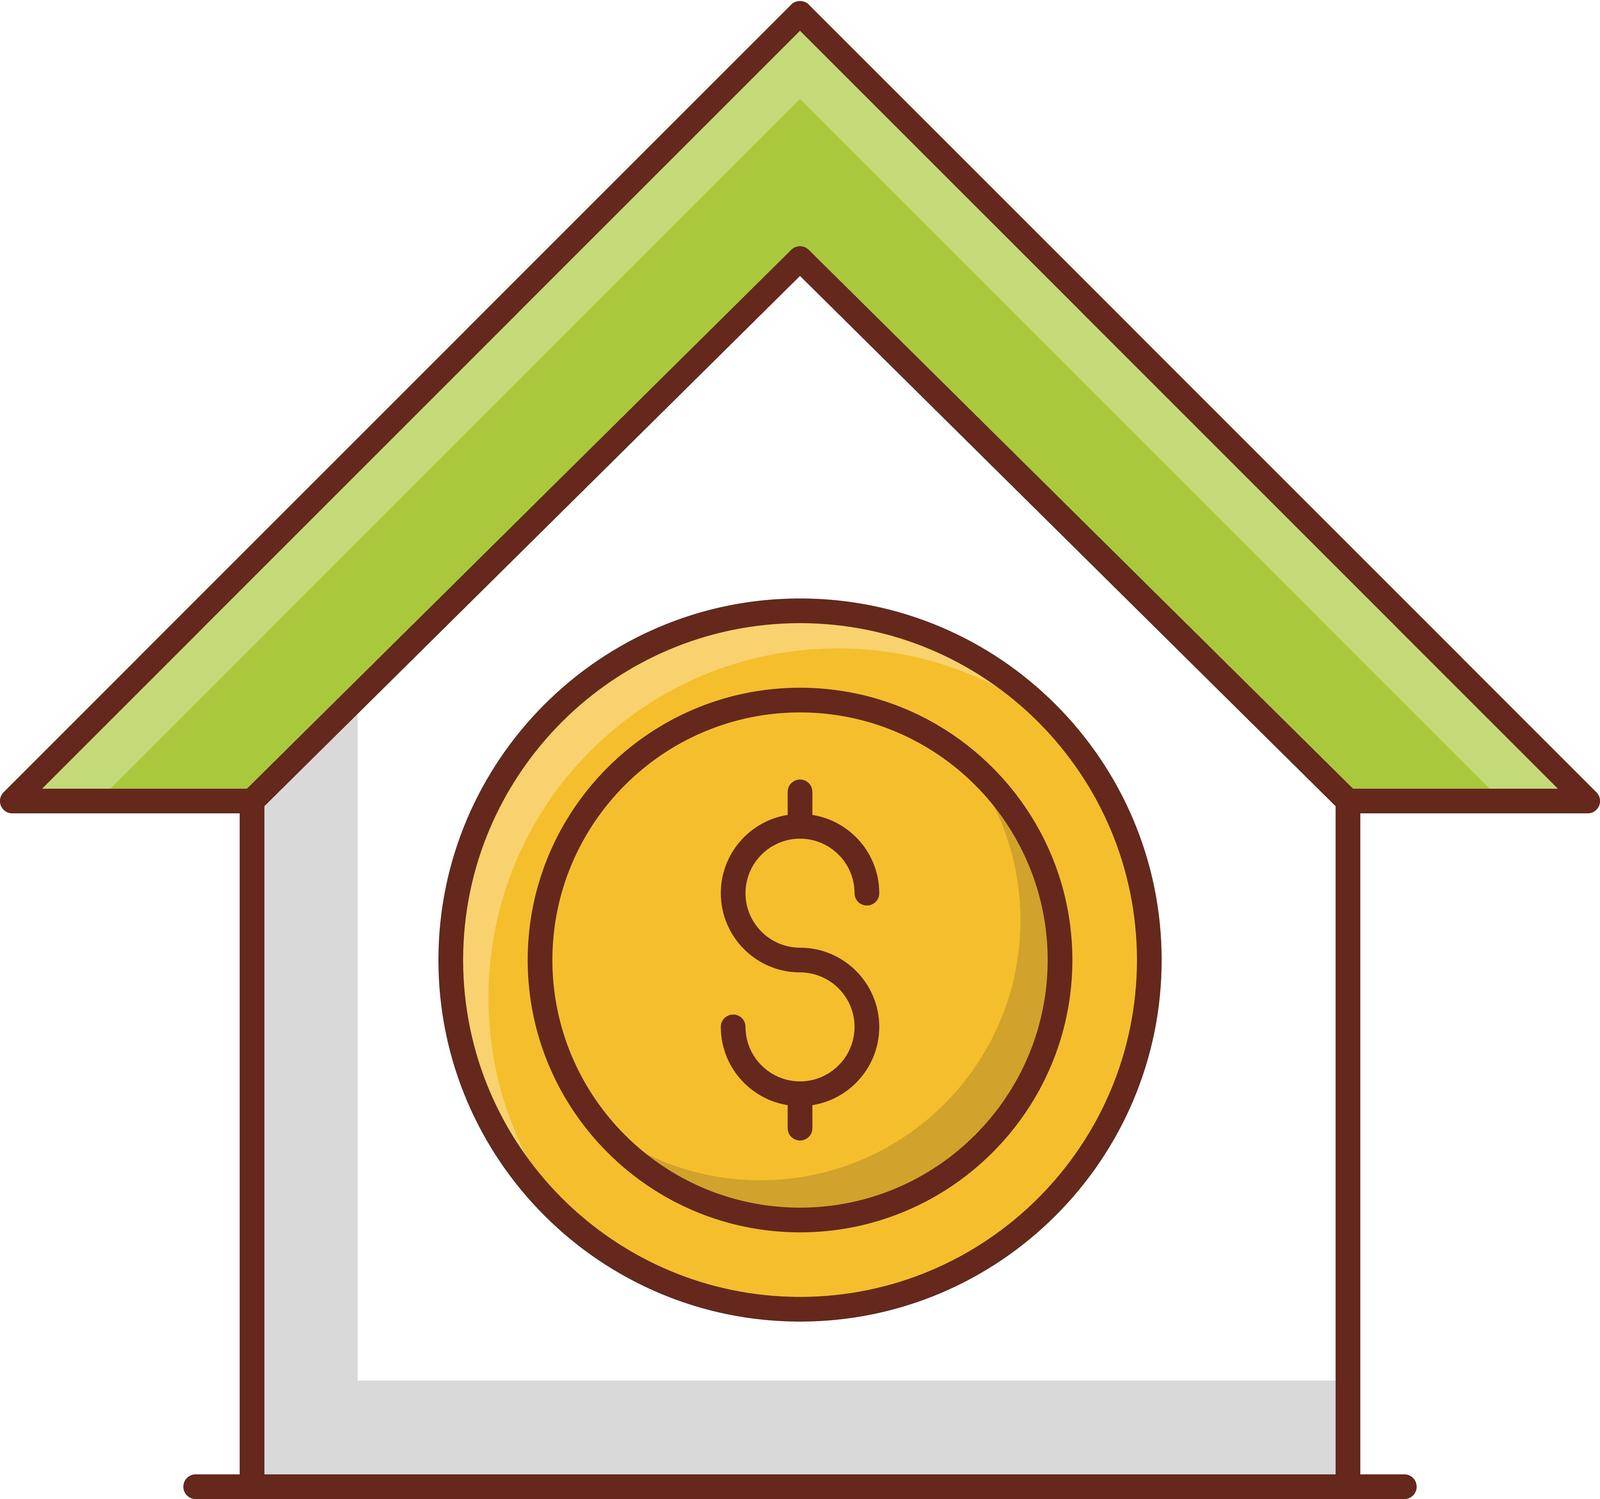 house vector flat color icon